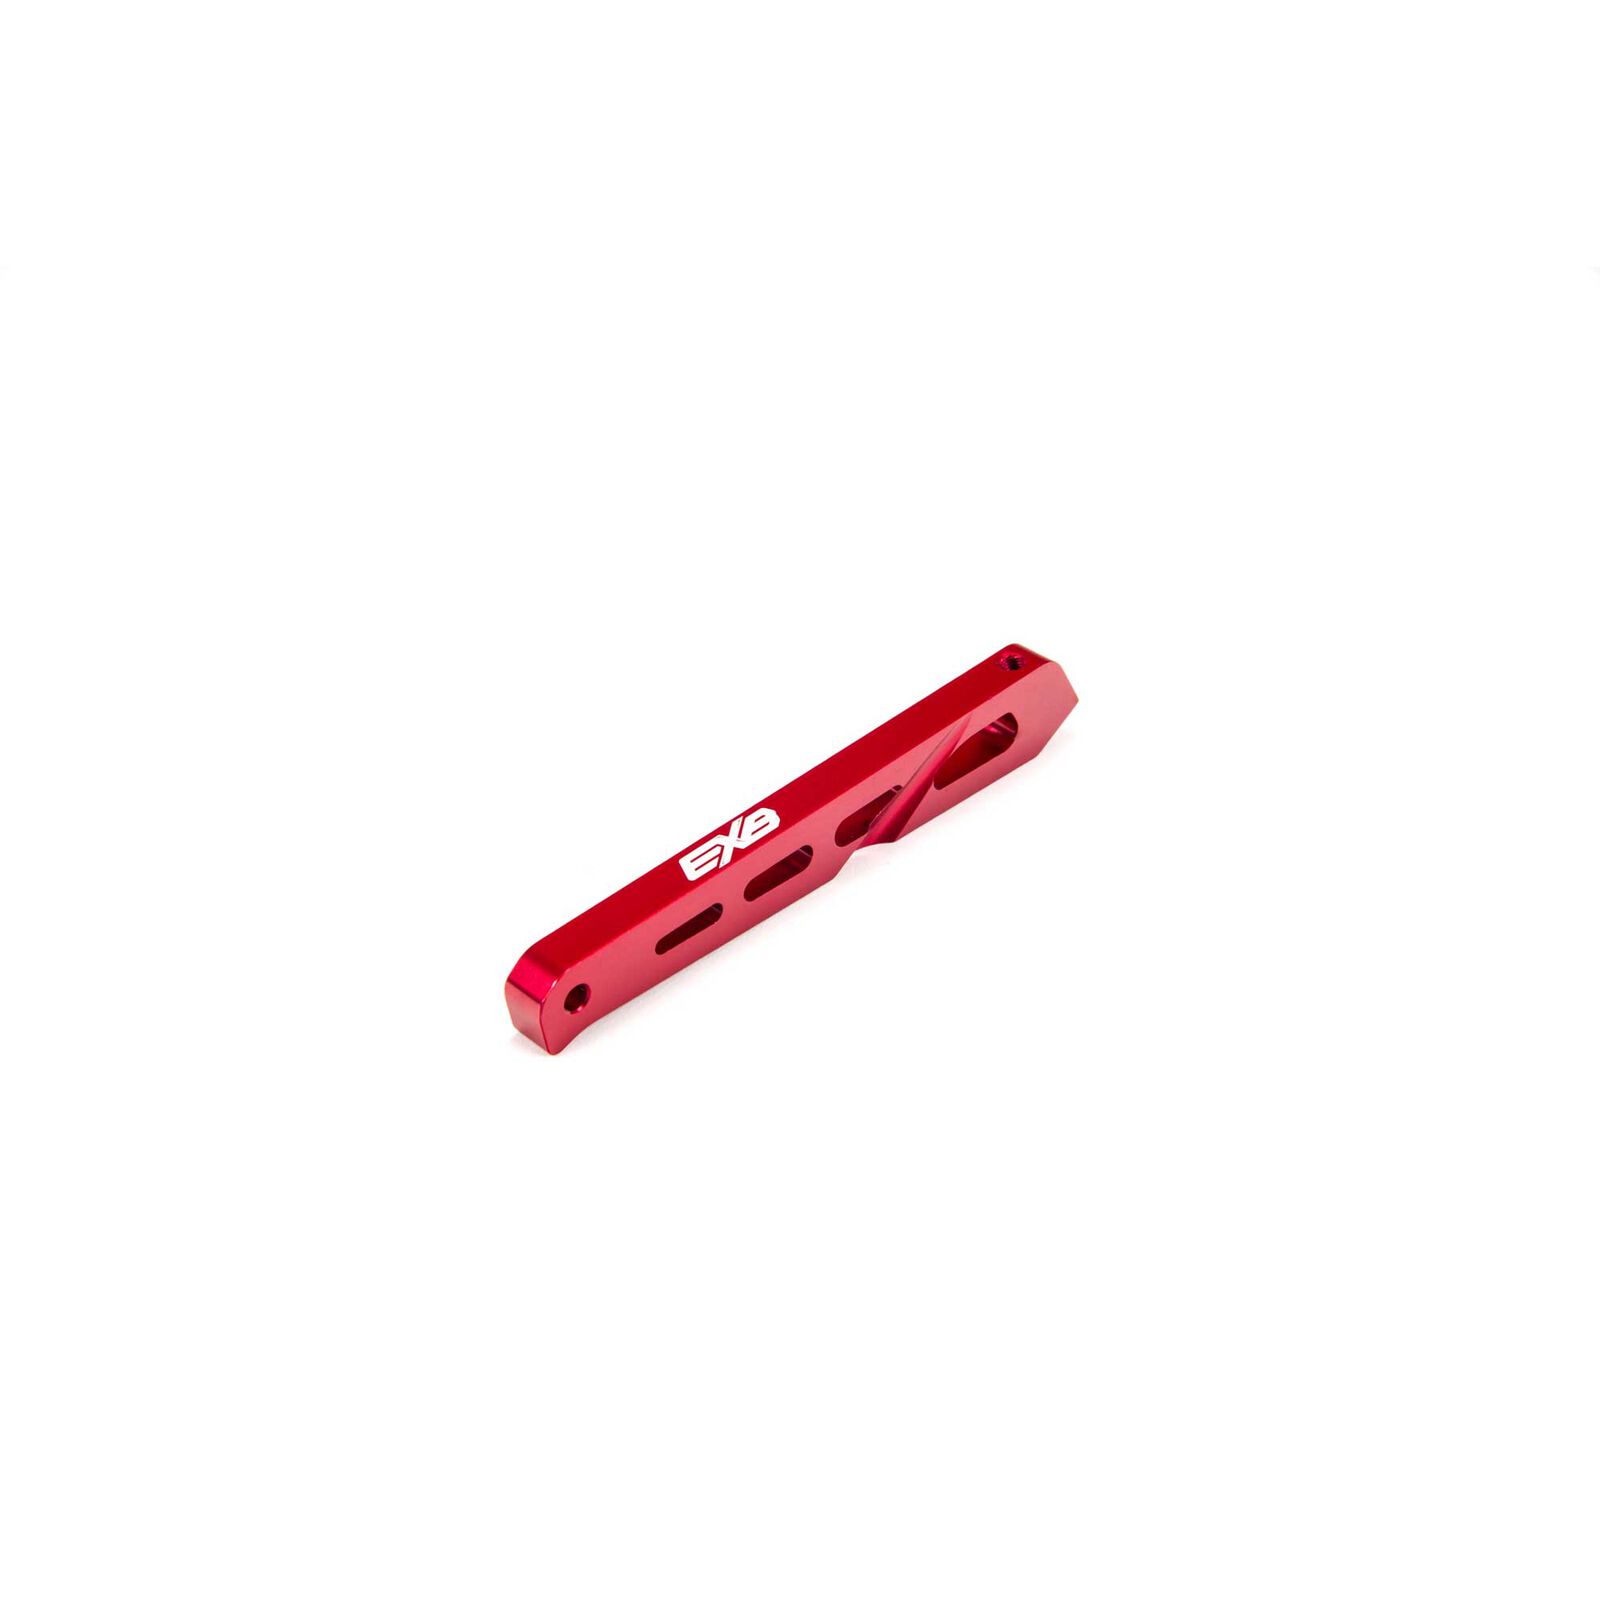 Rear Center Aluminum Chassis Brace, 87mm Red: EXB